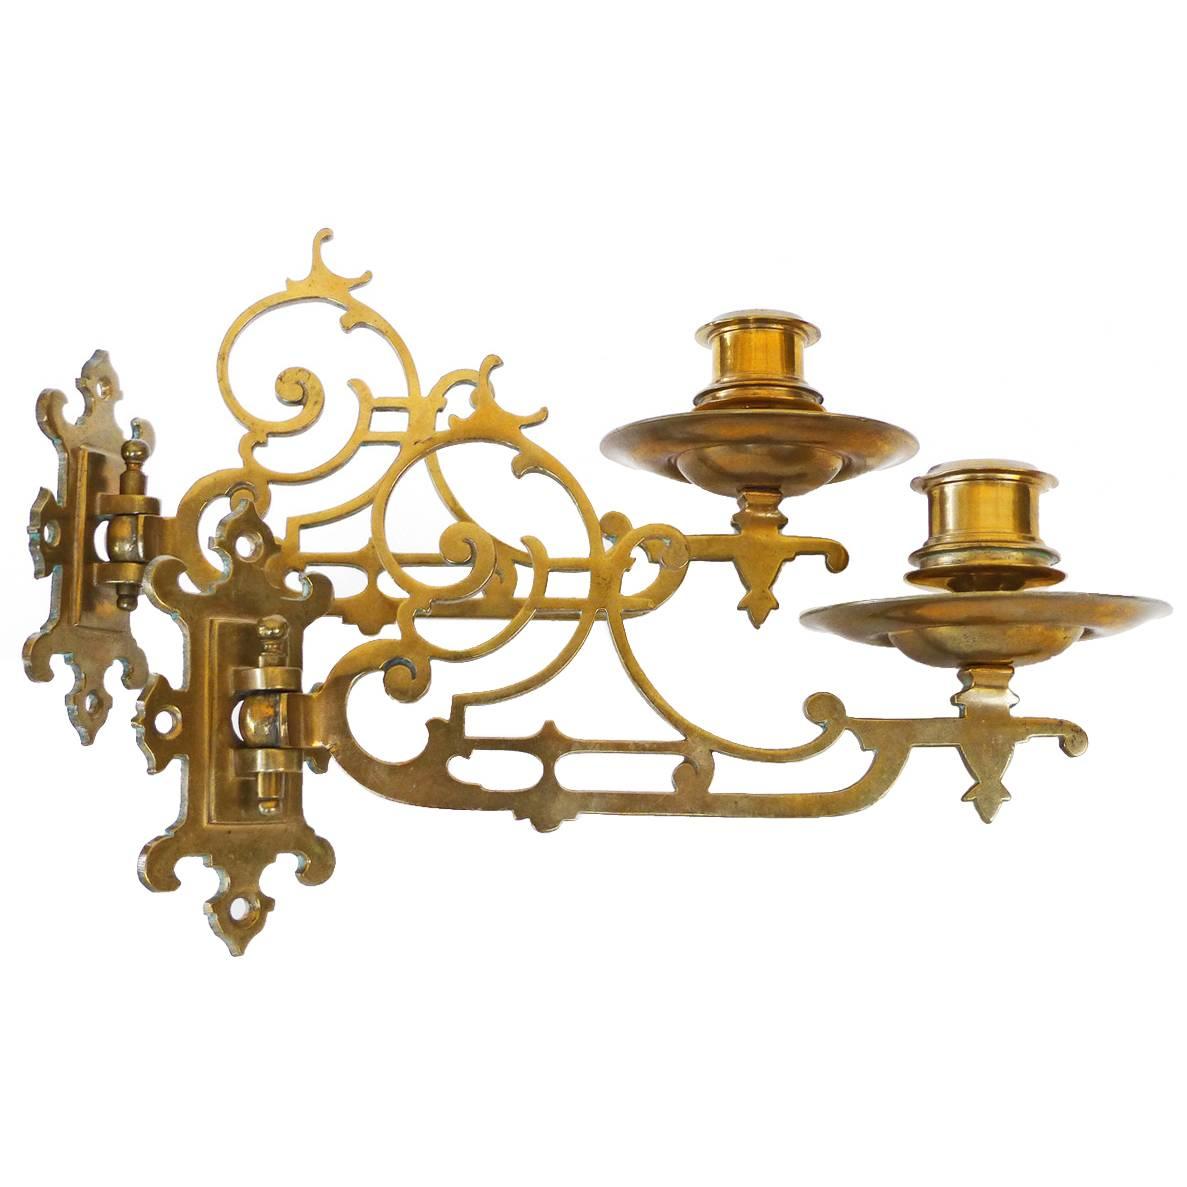 Pair of English Bell Metal Piano Sconces with Original Brackets, circa 1890 For Sale